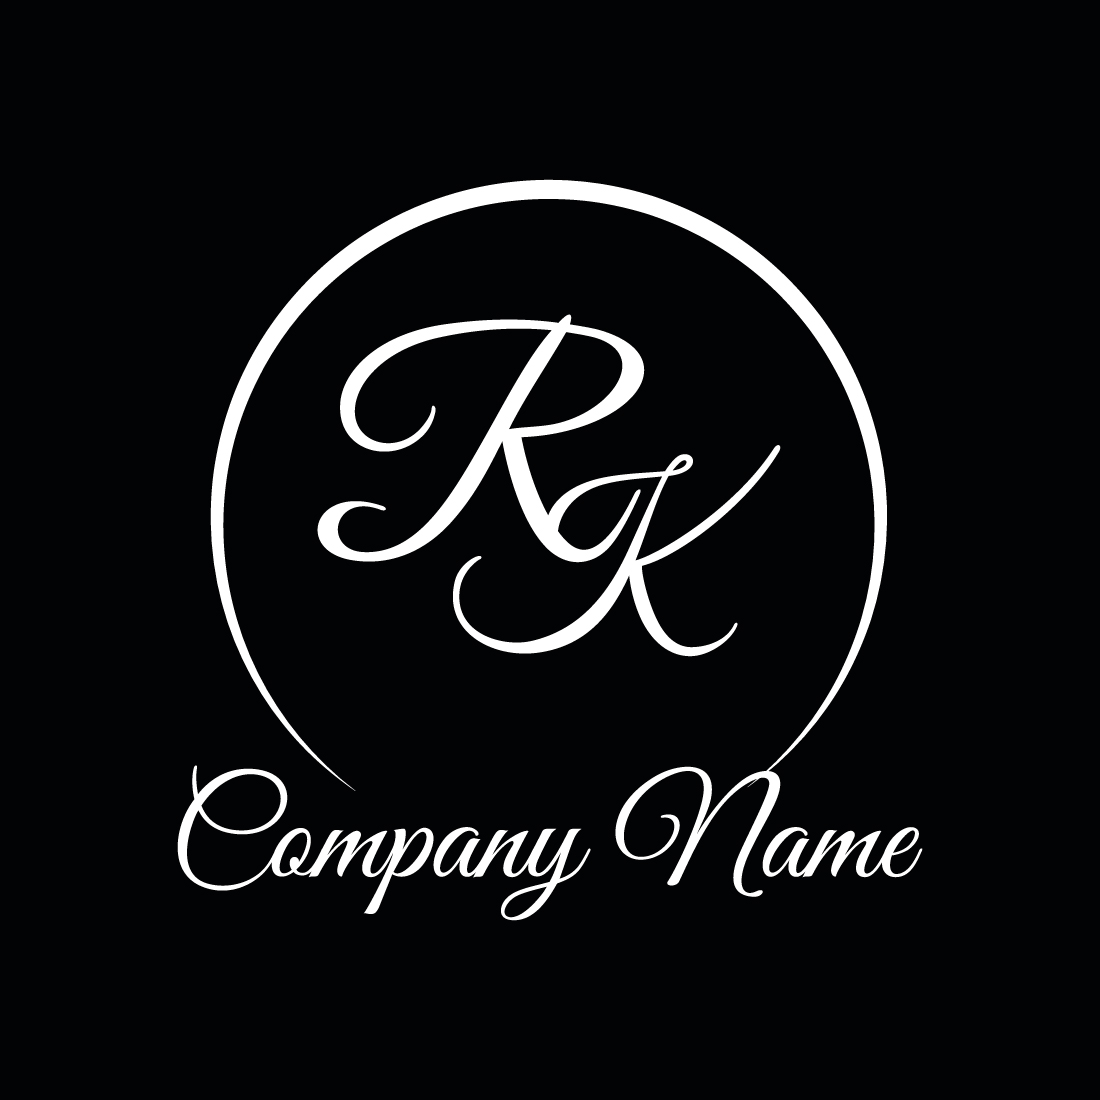 Initials RK letters logo design vector template images RK logo best circle signature fond logo preview image.